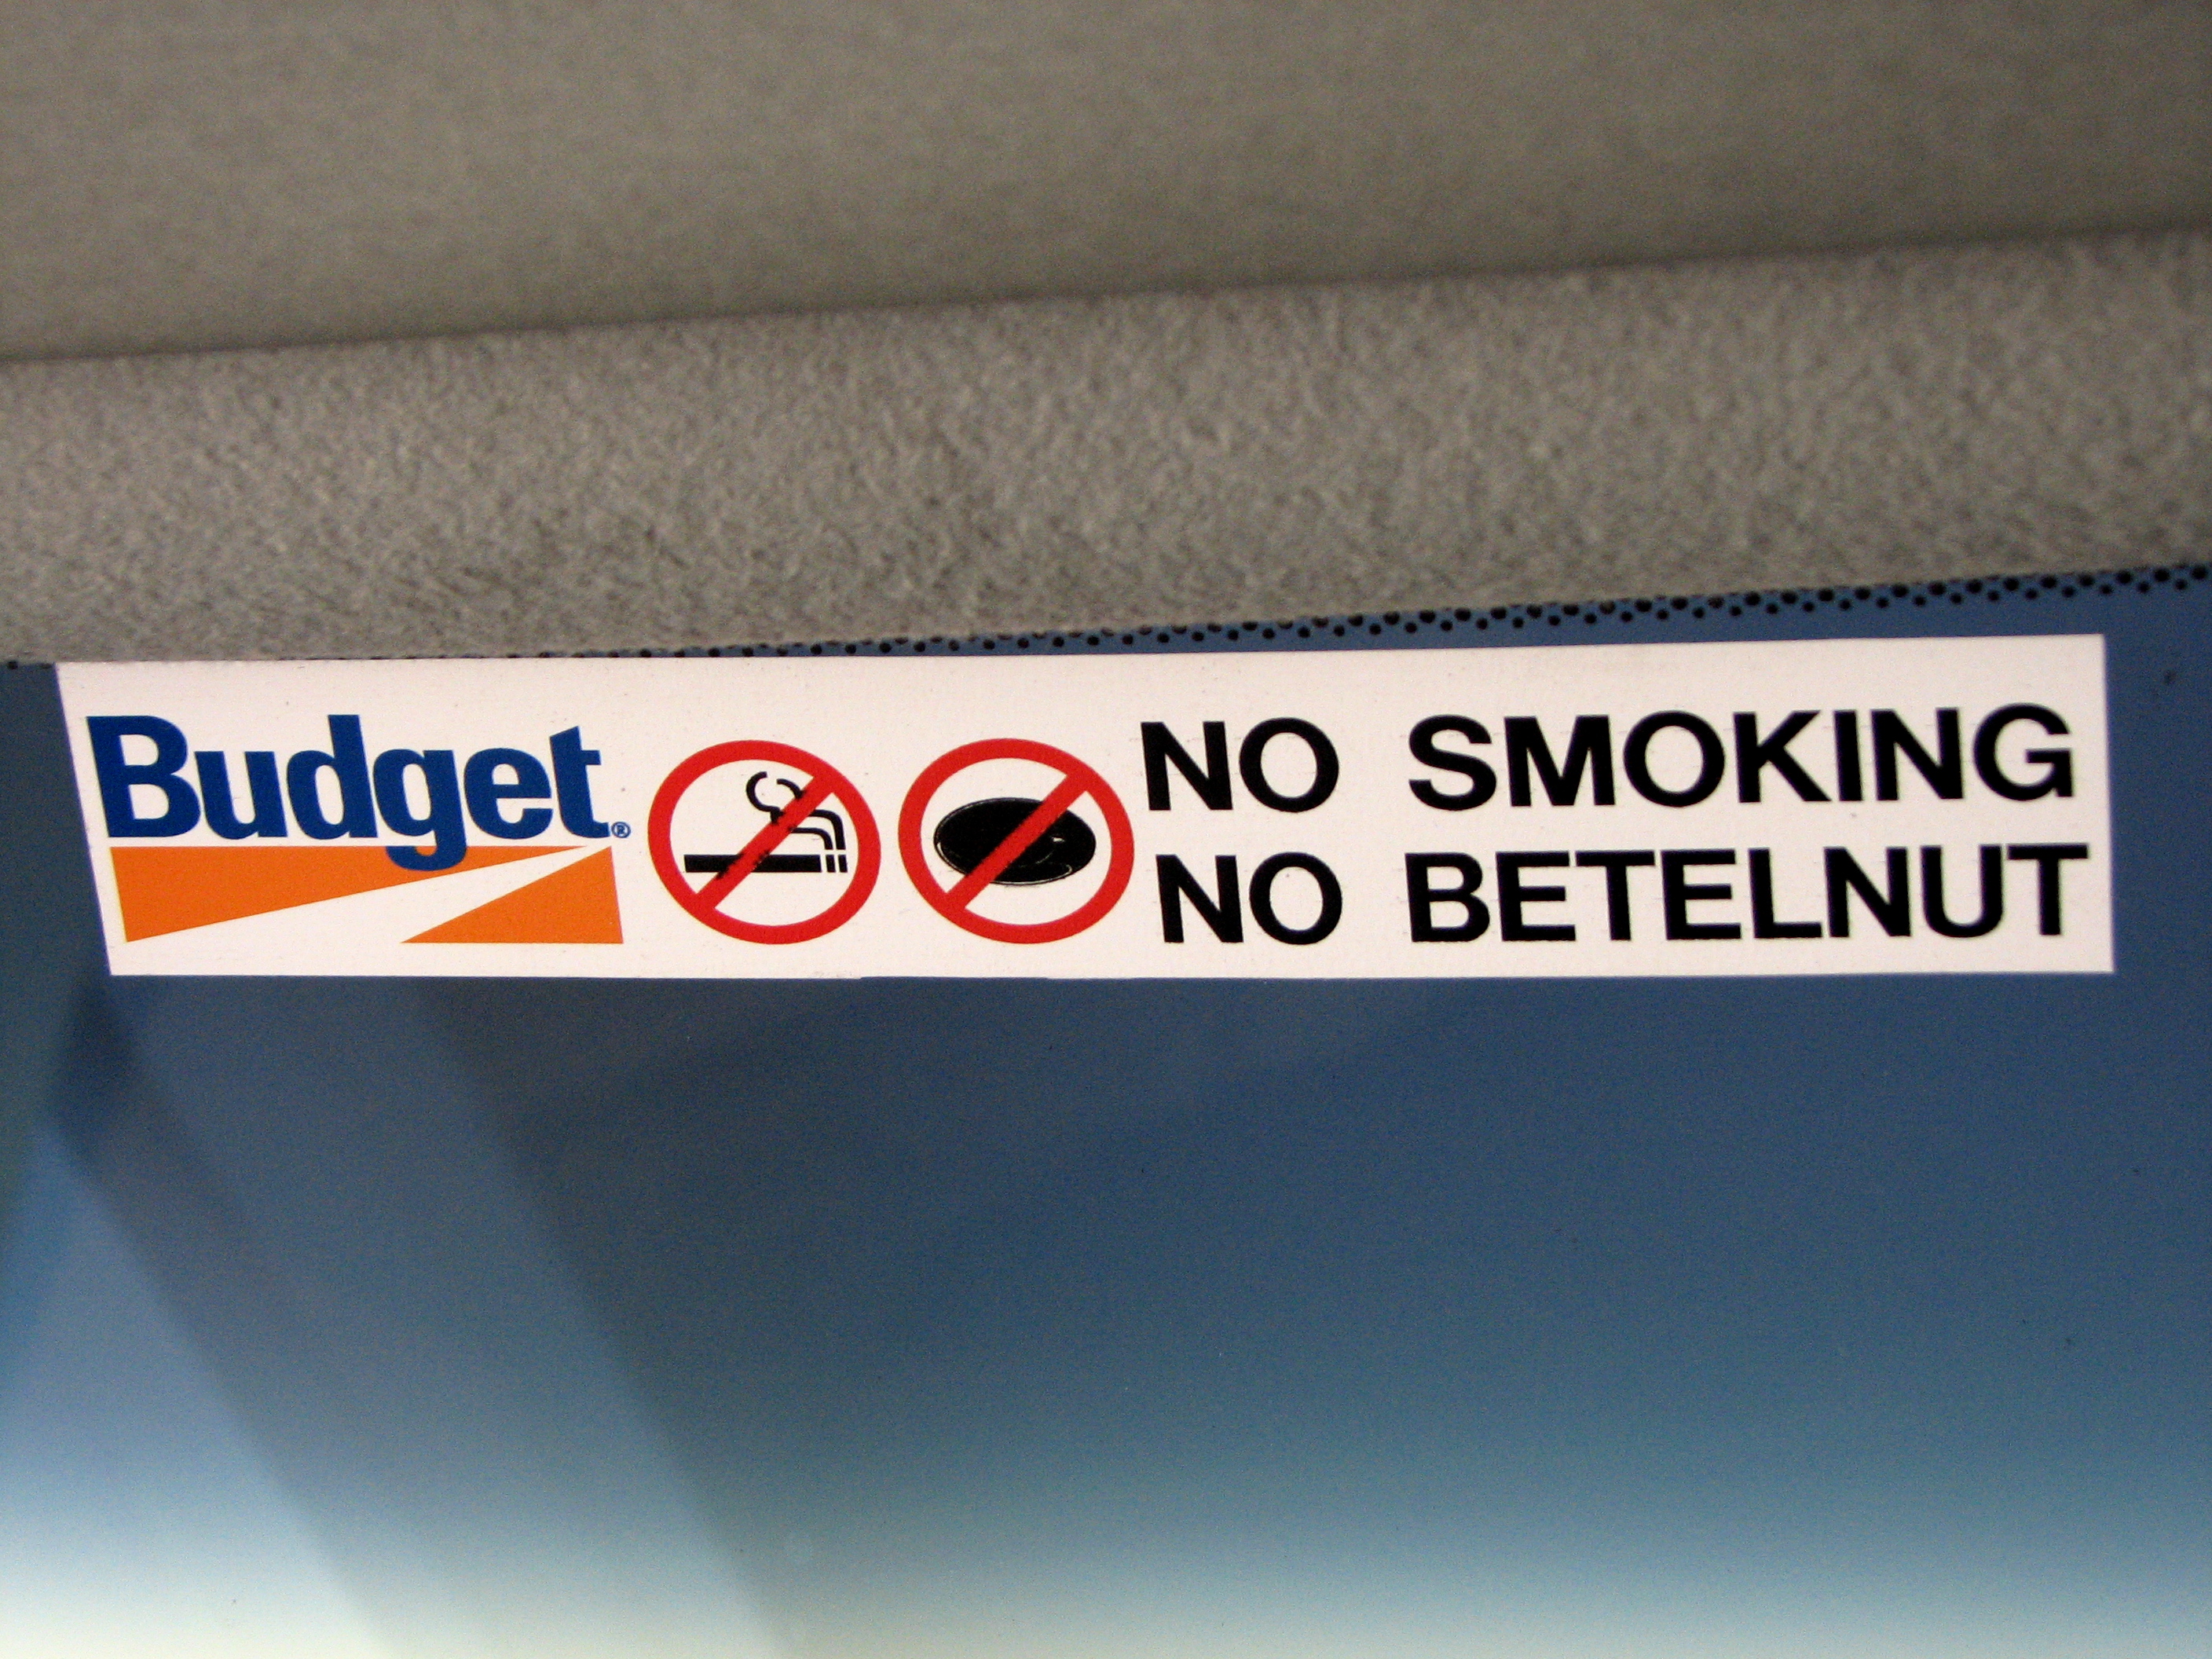 A sign in Port Moresby, PNG (Drew Douglas/Flickr/CC BY-NC 2.0)